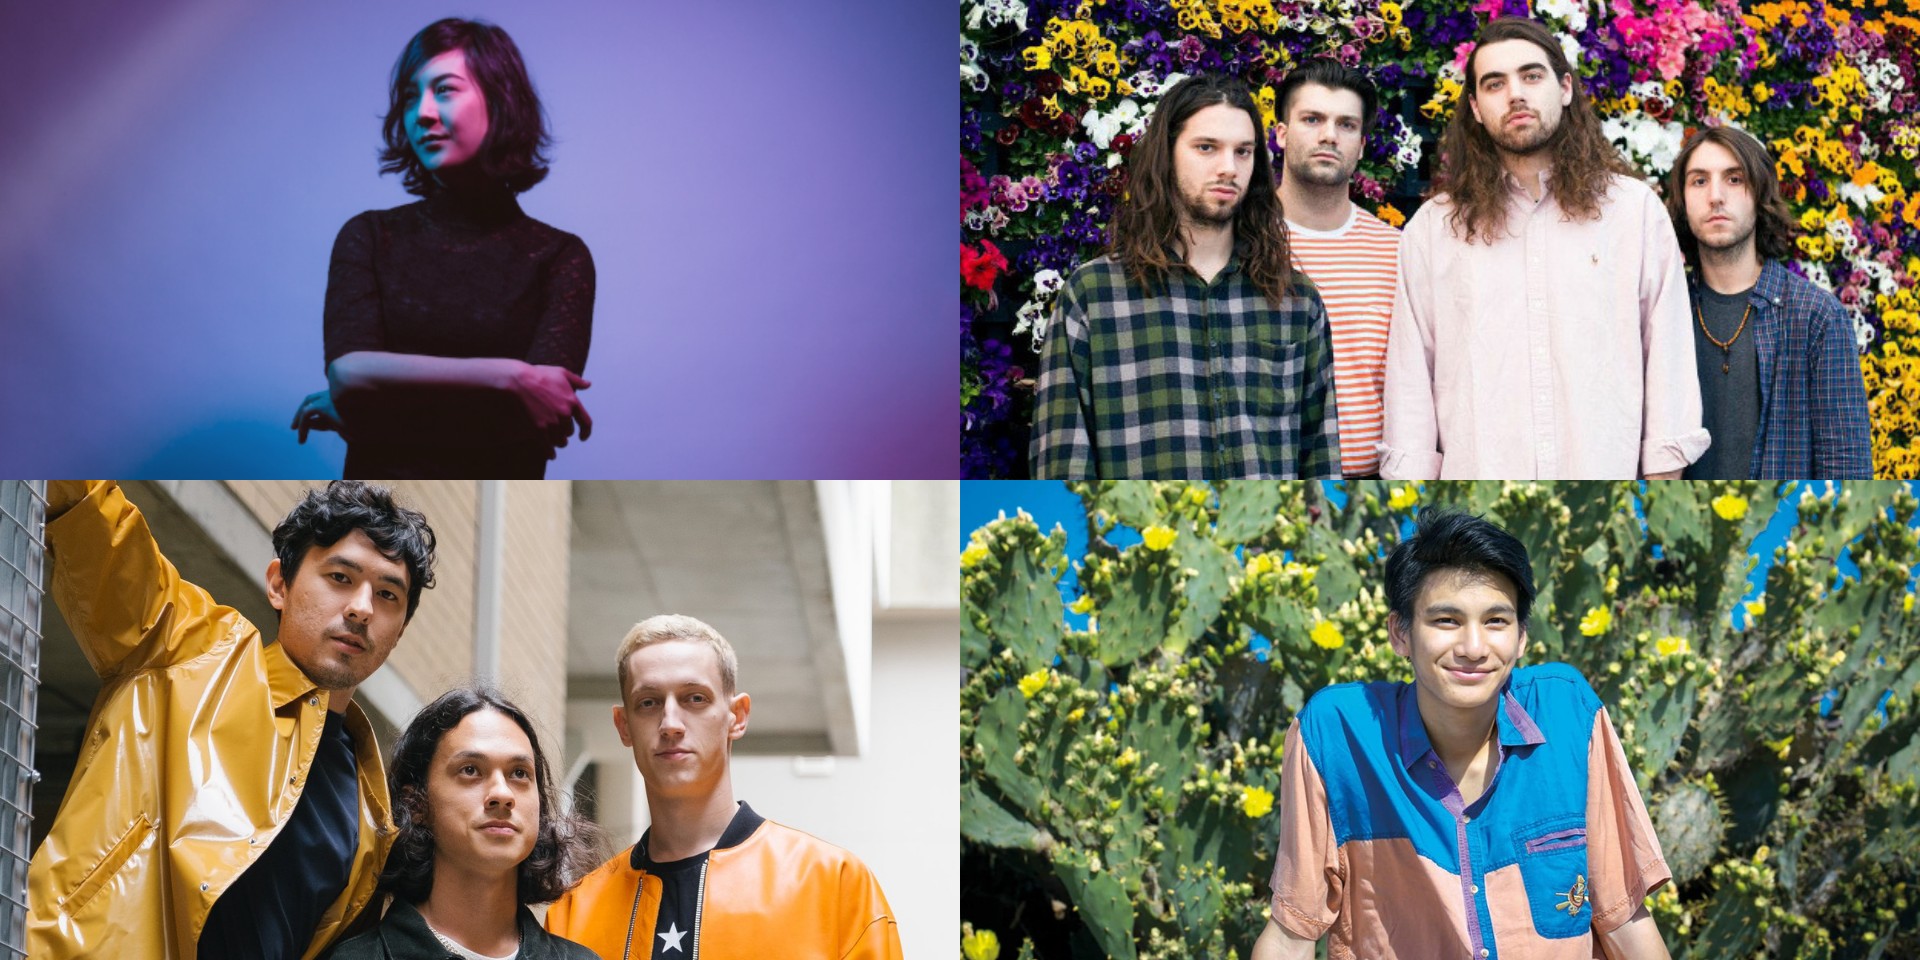 Summer Noise 2019 announces phase one lineup: Last Dinosaurs, Japanese Breakfast, Phum Viphurit, and more